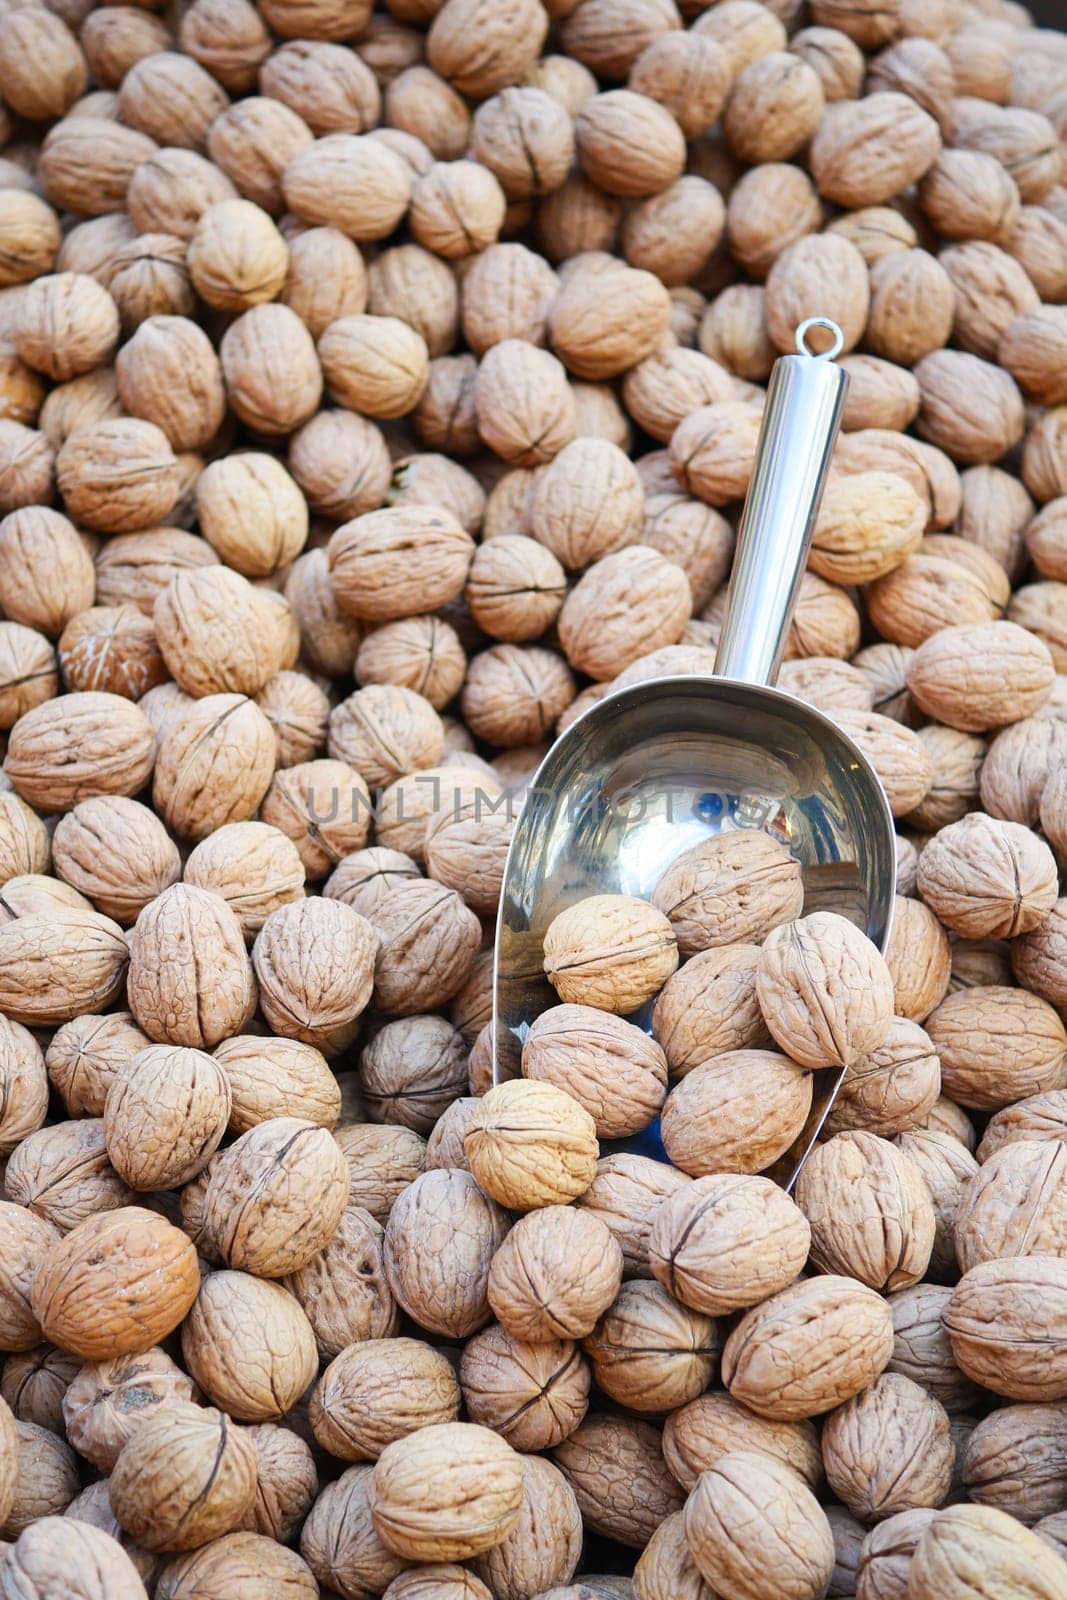 A scoop of walnuts, a superfood, rests on a stack of nuts seeds by towfiq007